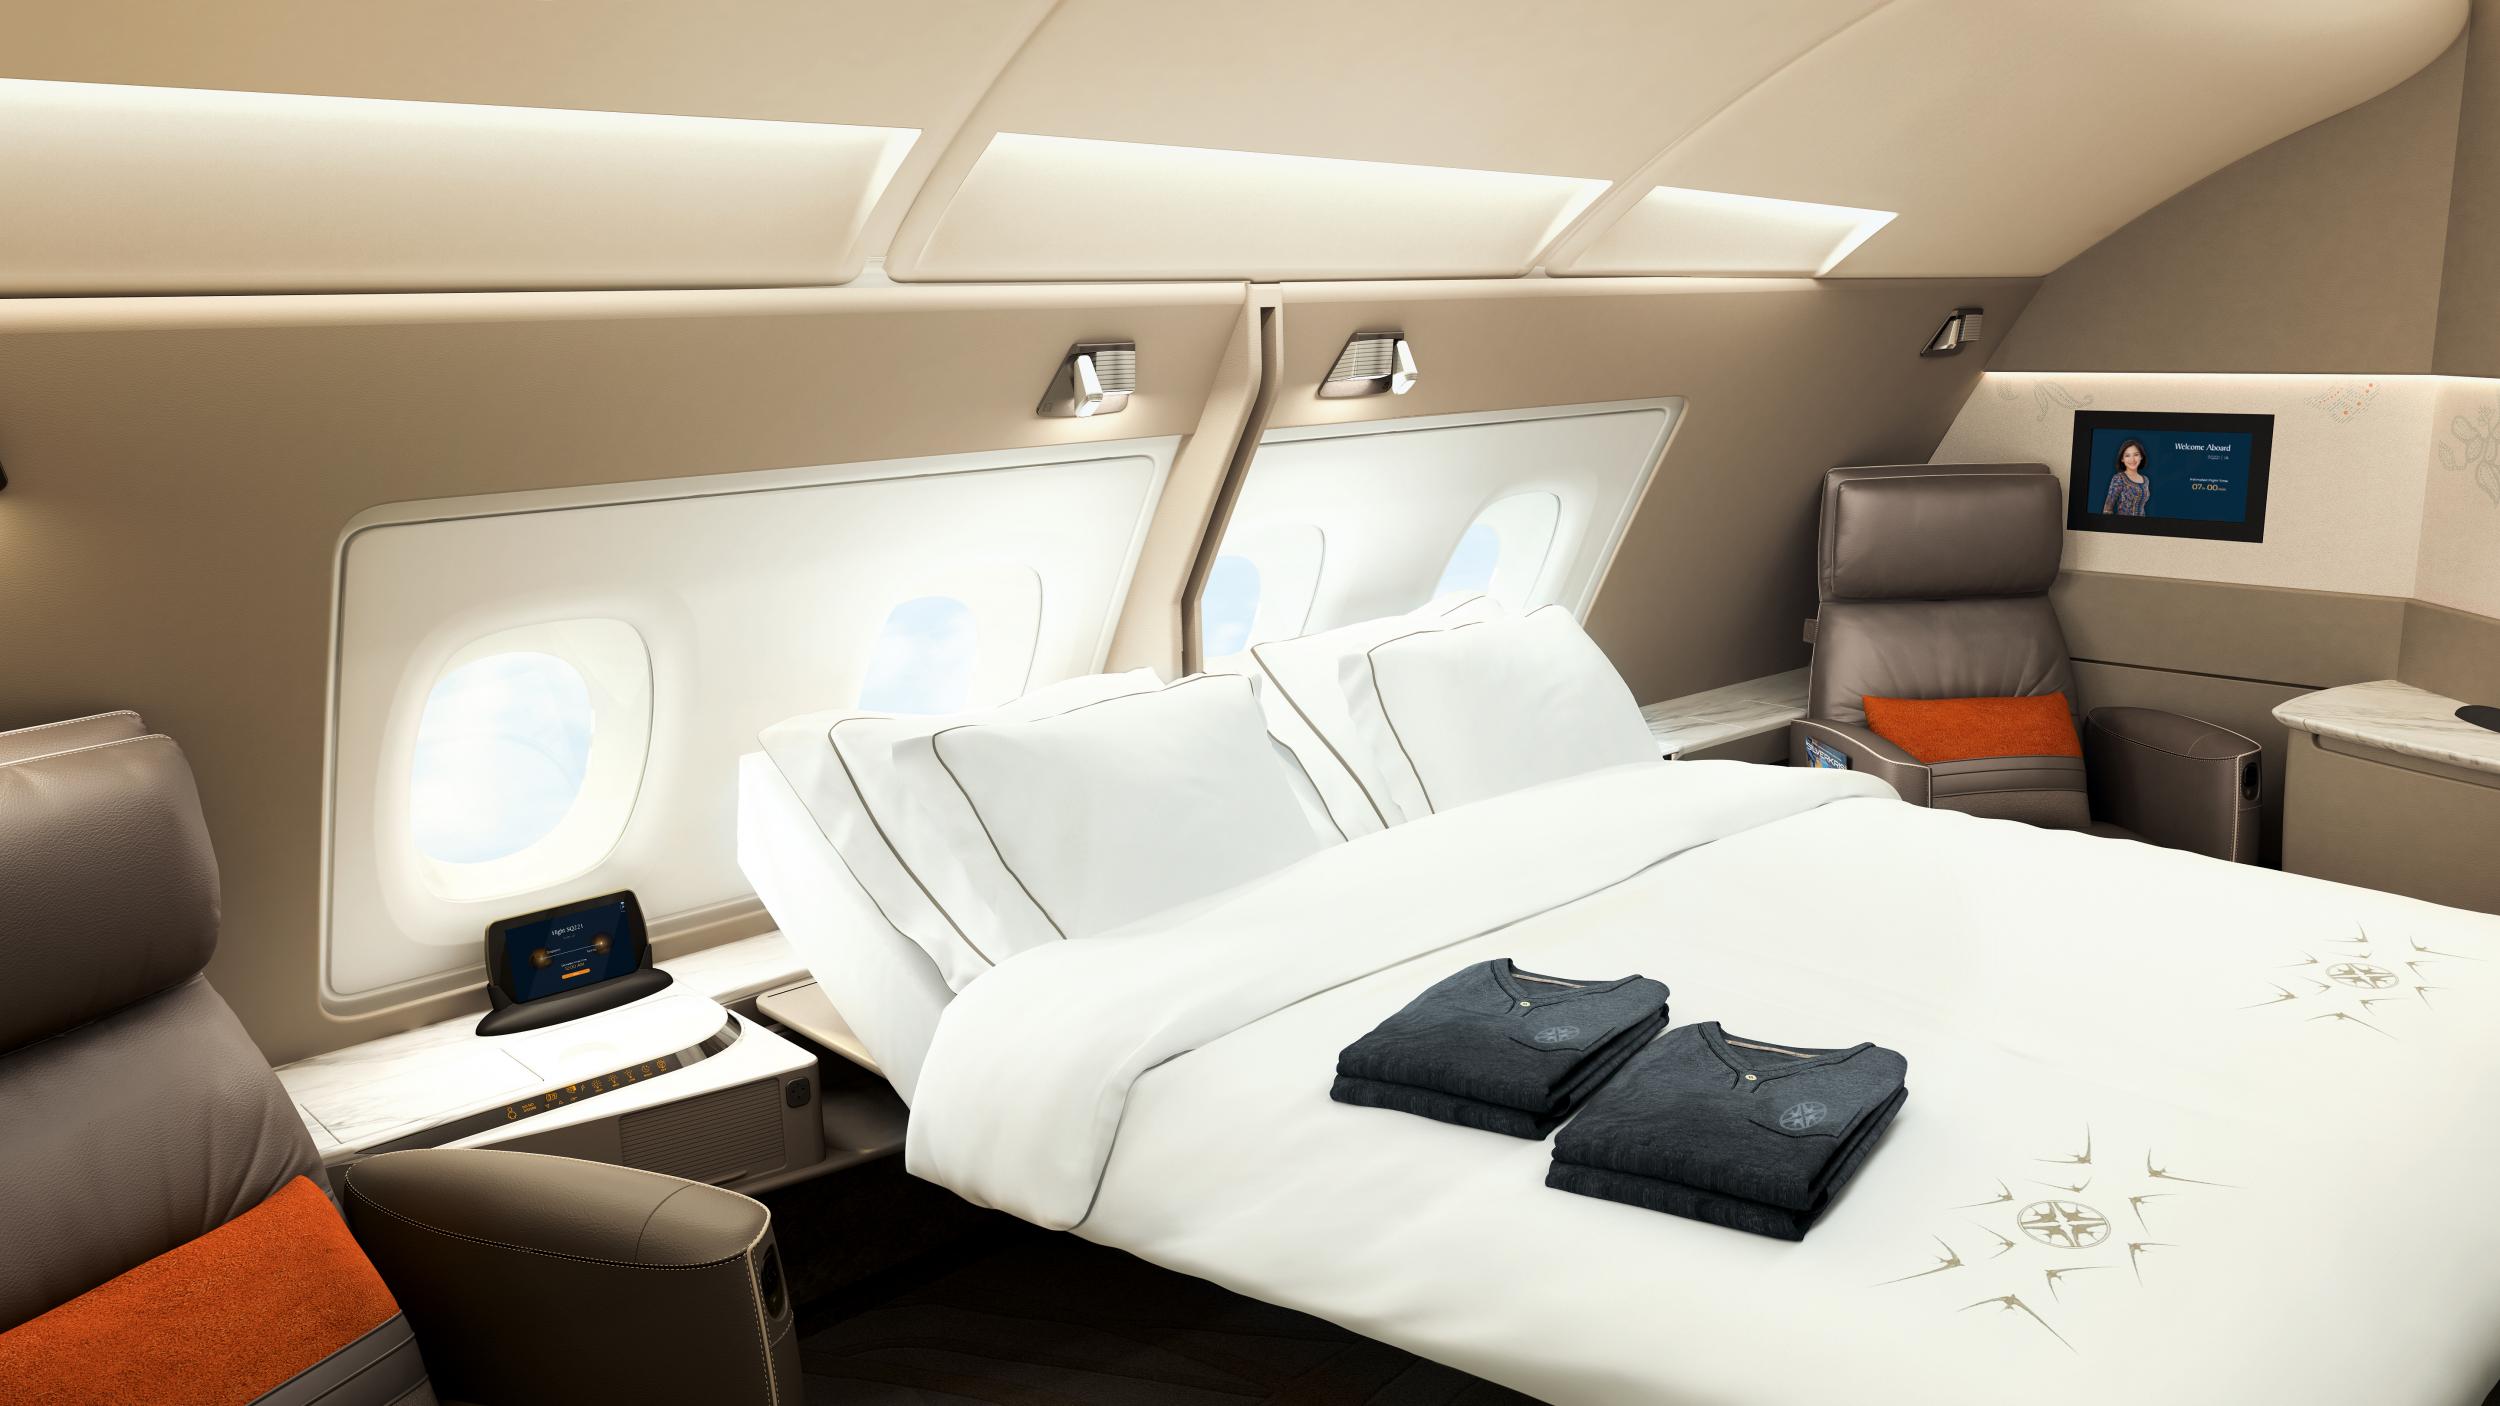 Singapore Airlines is introducing luxury suites